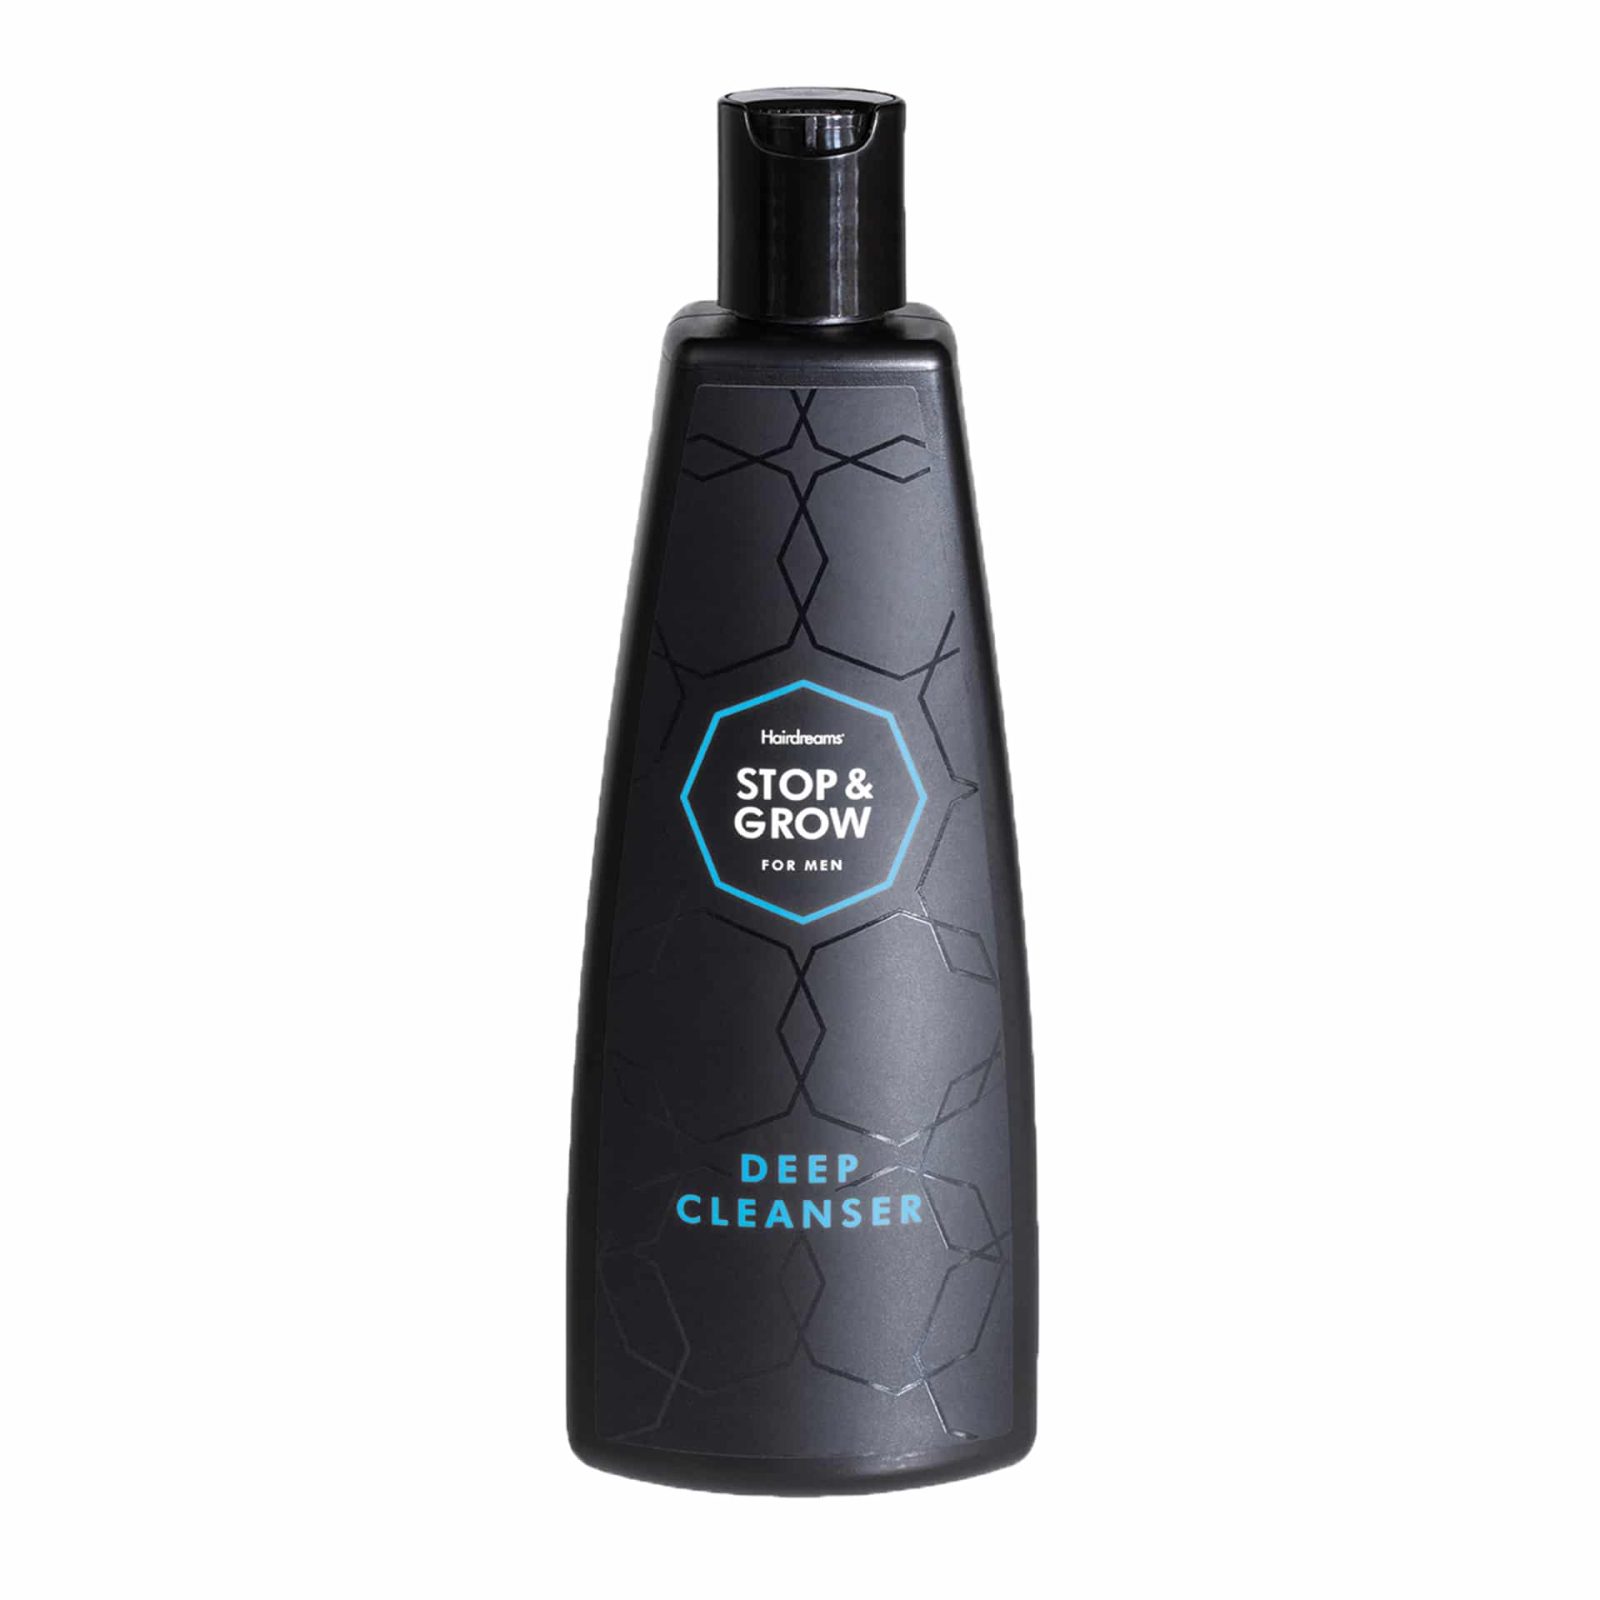 Stop & Grow for Men Deep Cleanse Hairdreams